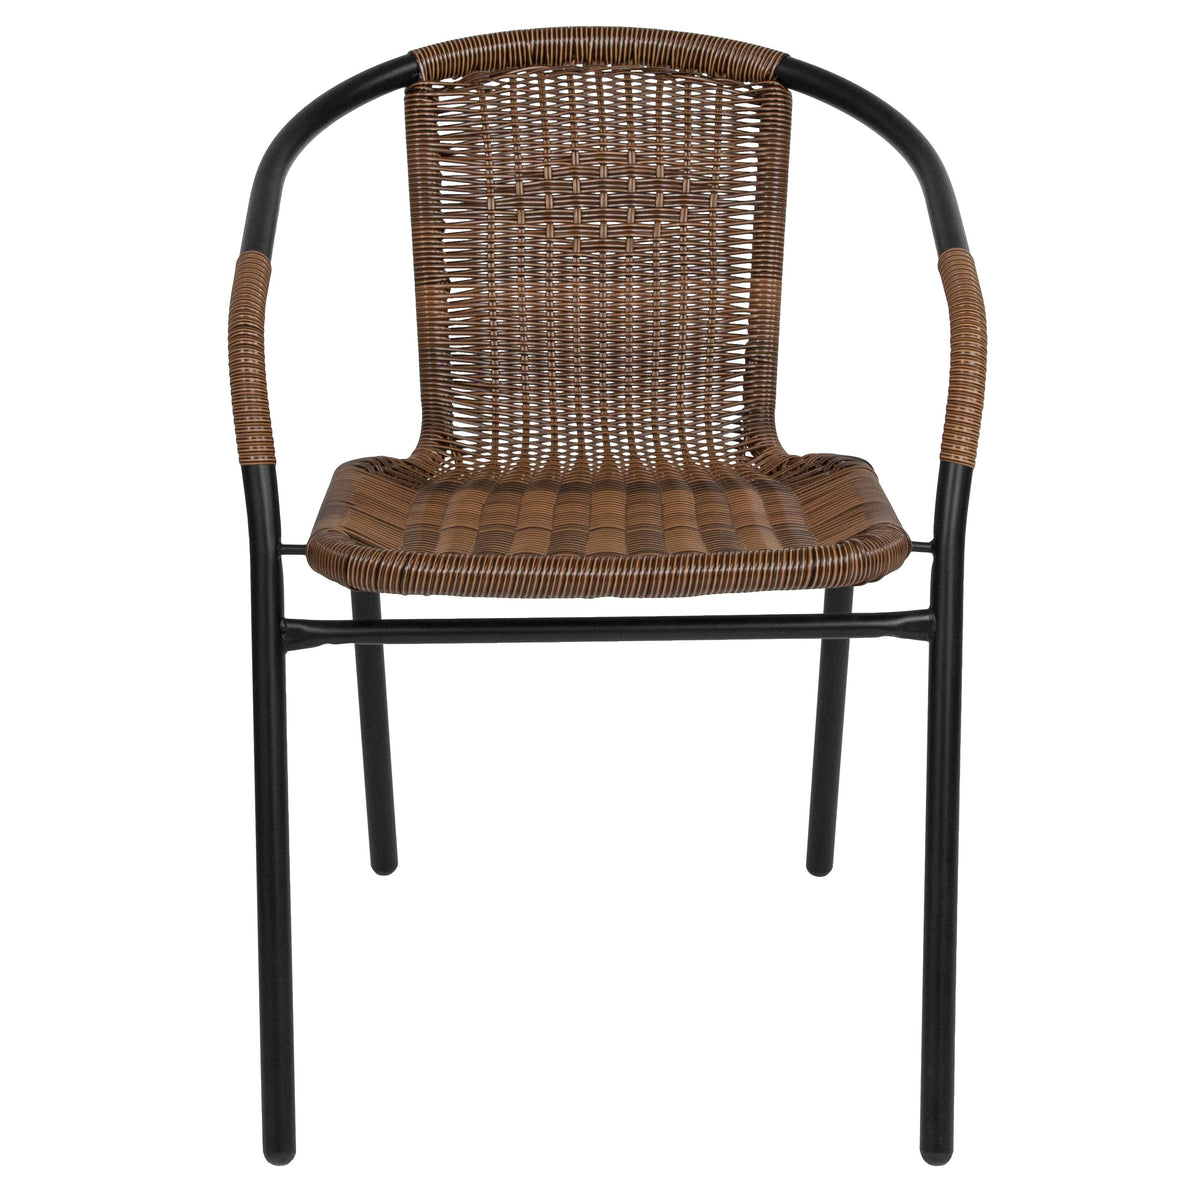 Medium Brown |#| Medium Rattan Indoor-Outdoor Restaurant Stack Chair with Curved Back